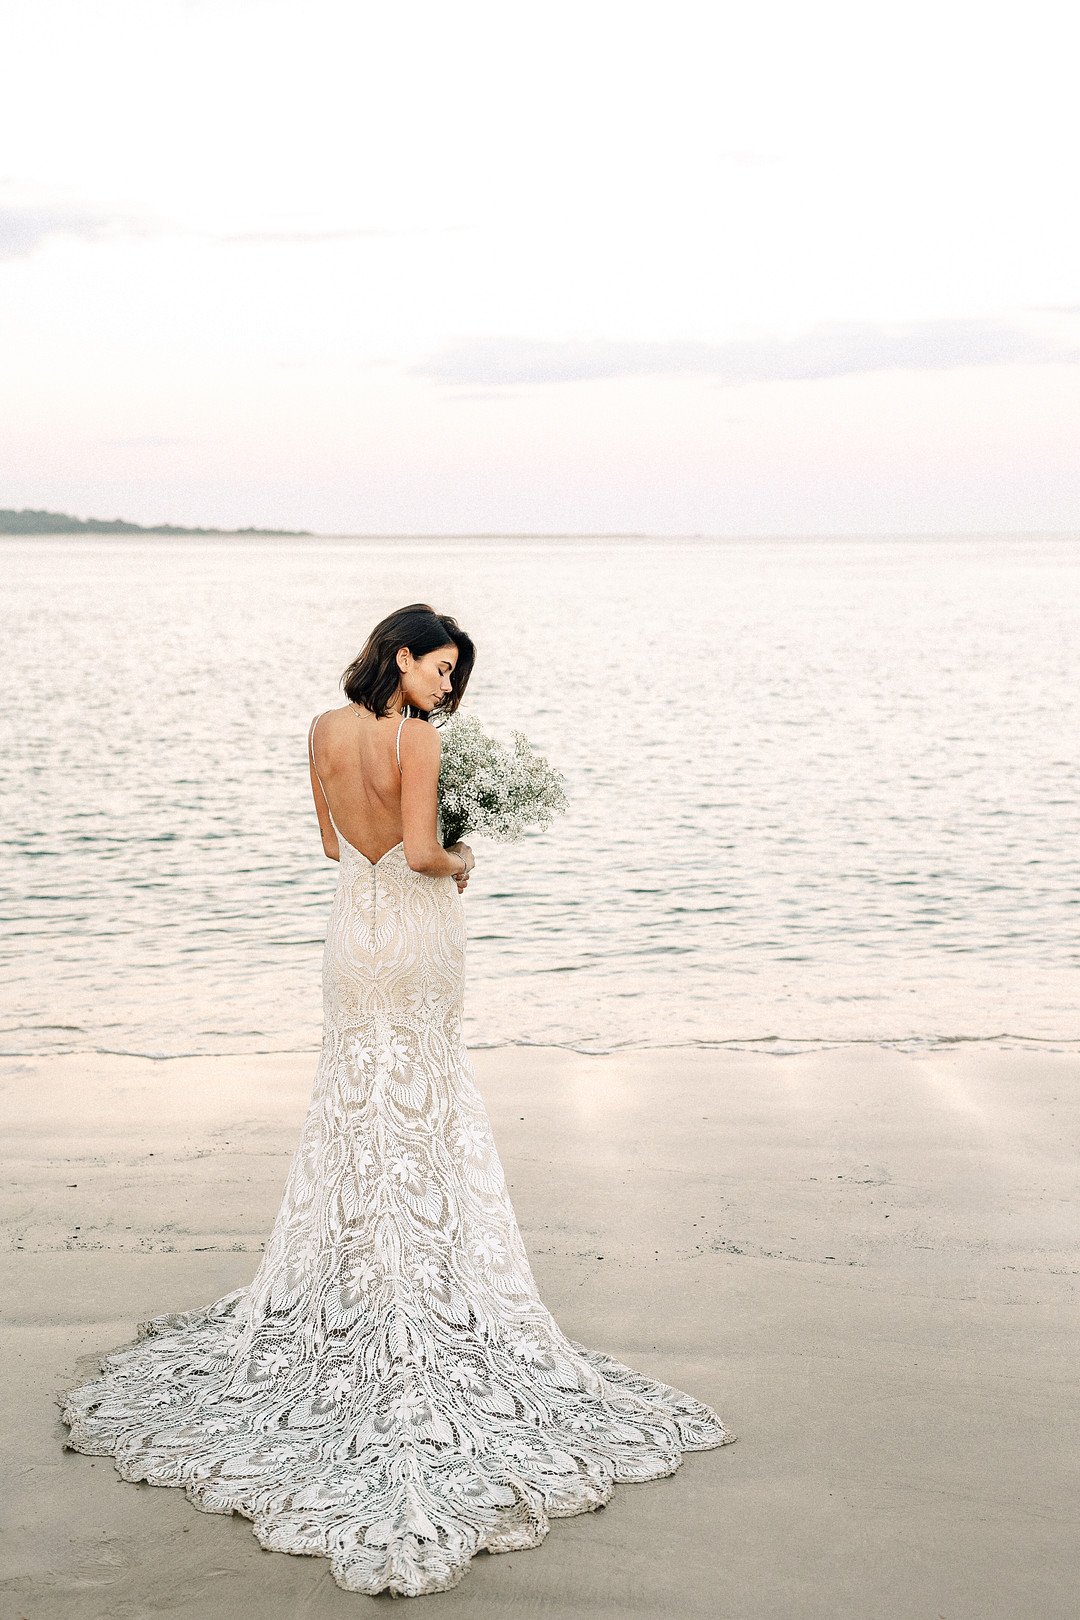 A beachy bridal moment_Carly Terry Photography_AW BRIDAL-1535_low.jpg